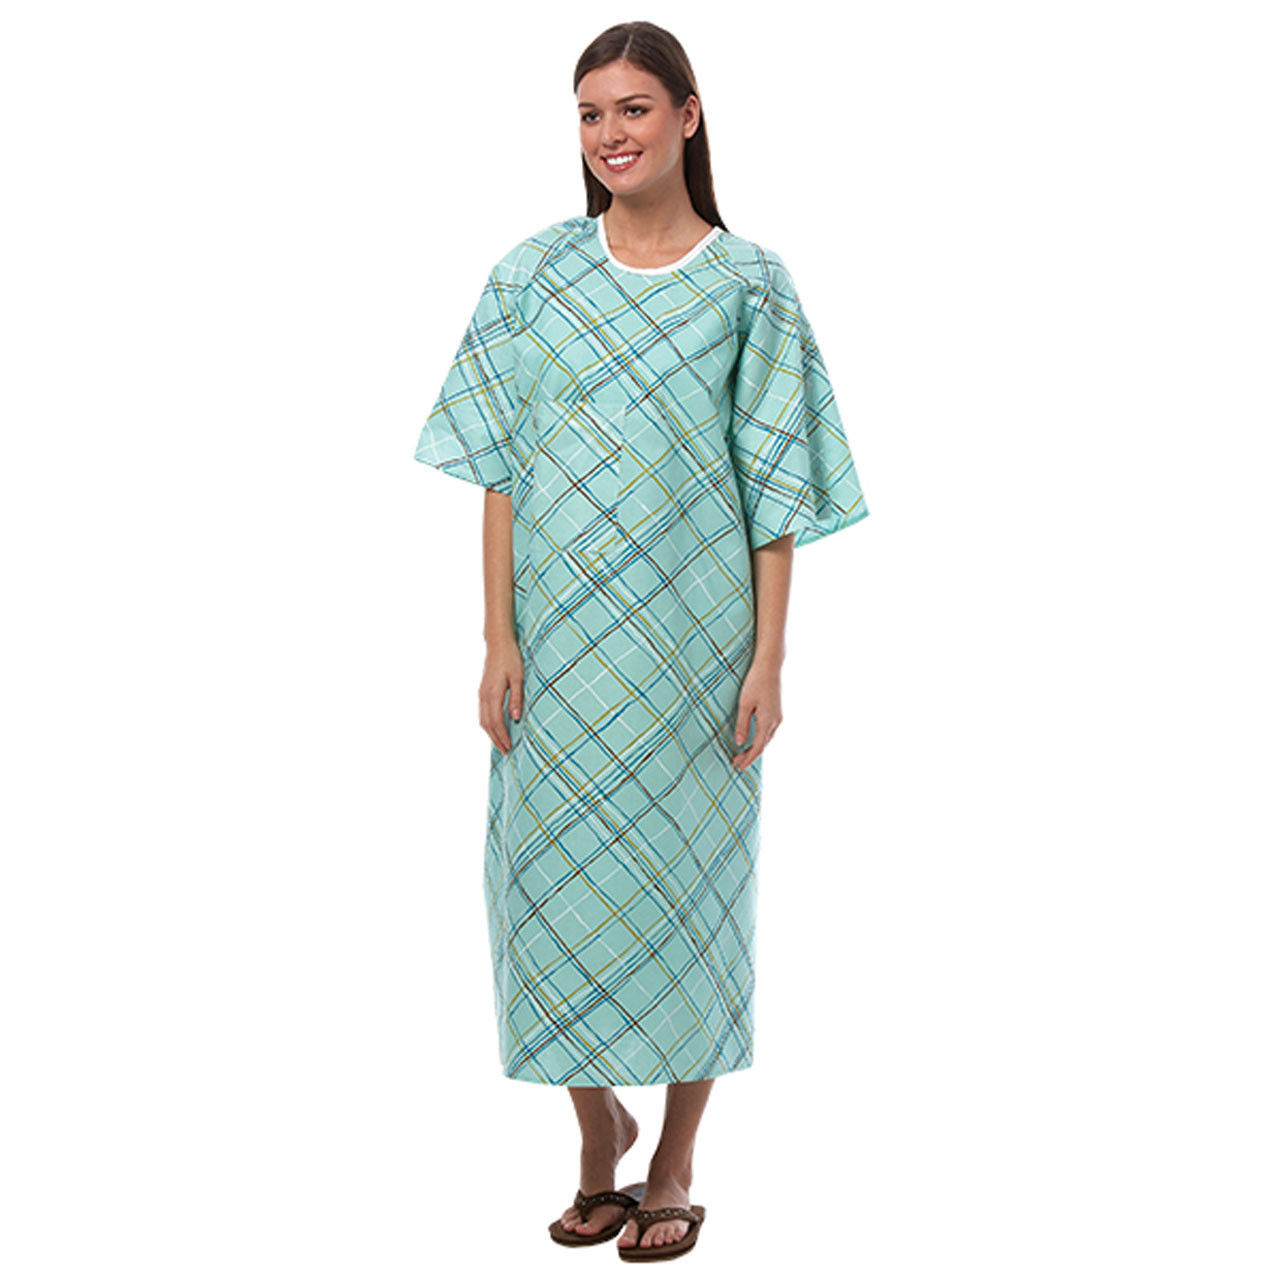 Is the design of this hospital gown made for easy wear?